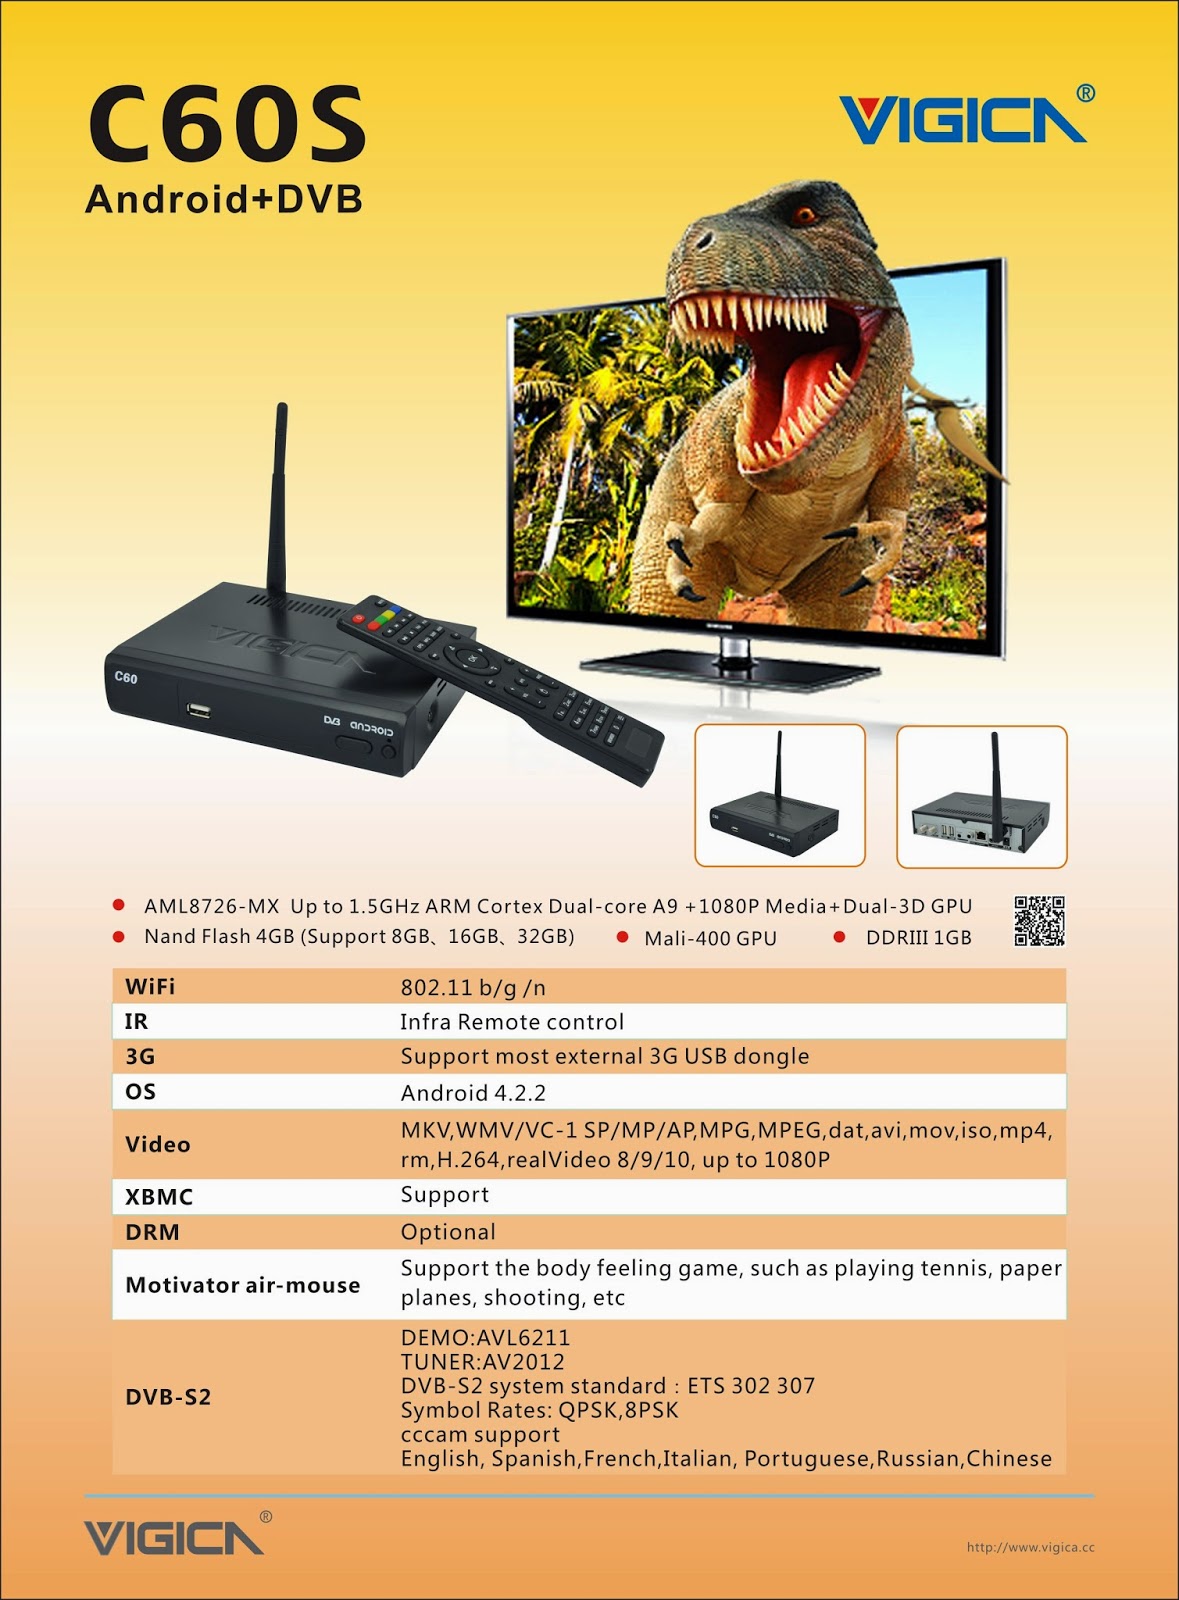 http://www.vigica.cc/products/hd-android-smart-tv-box-dvb-s2-android-vigica-c60s.html